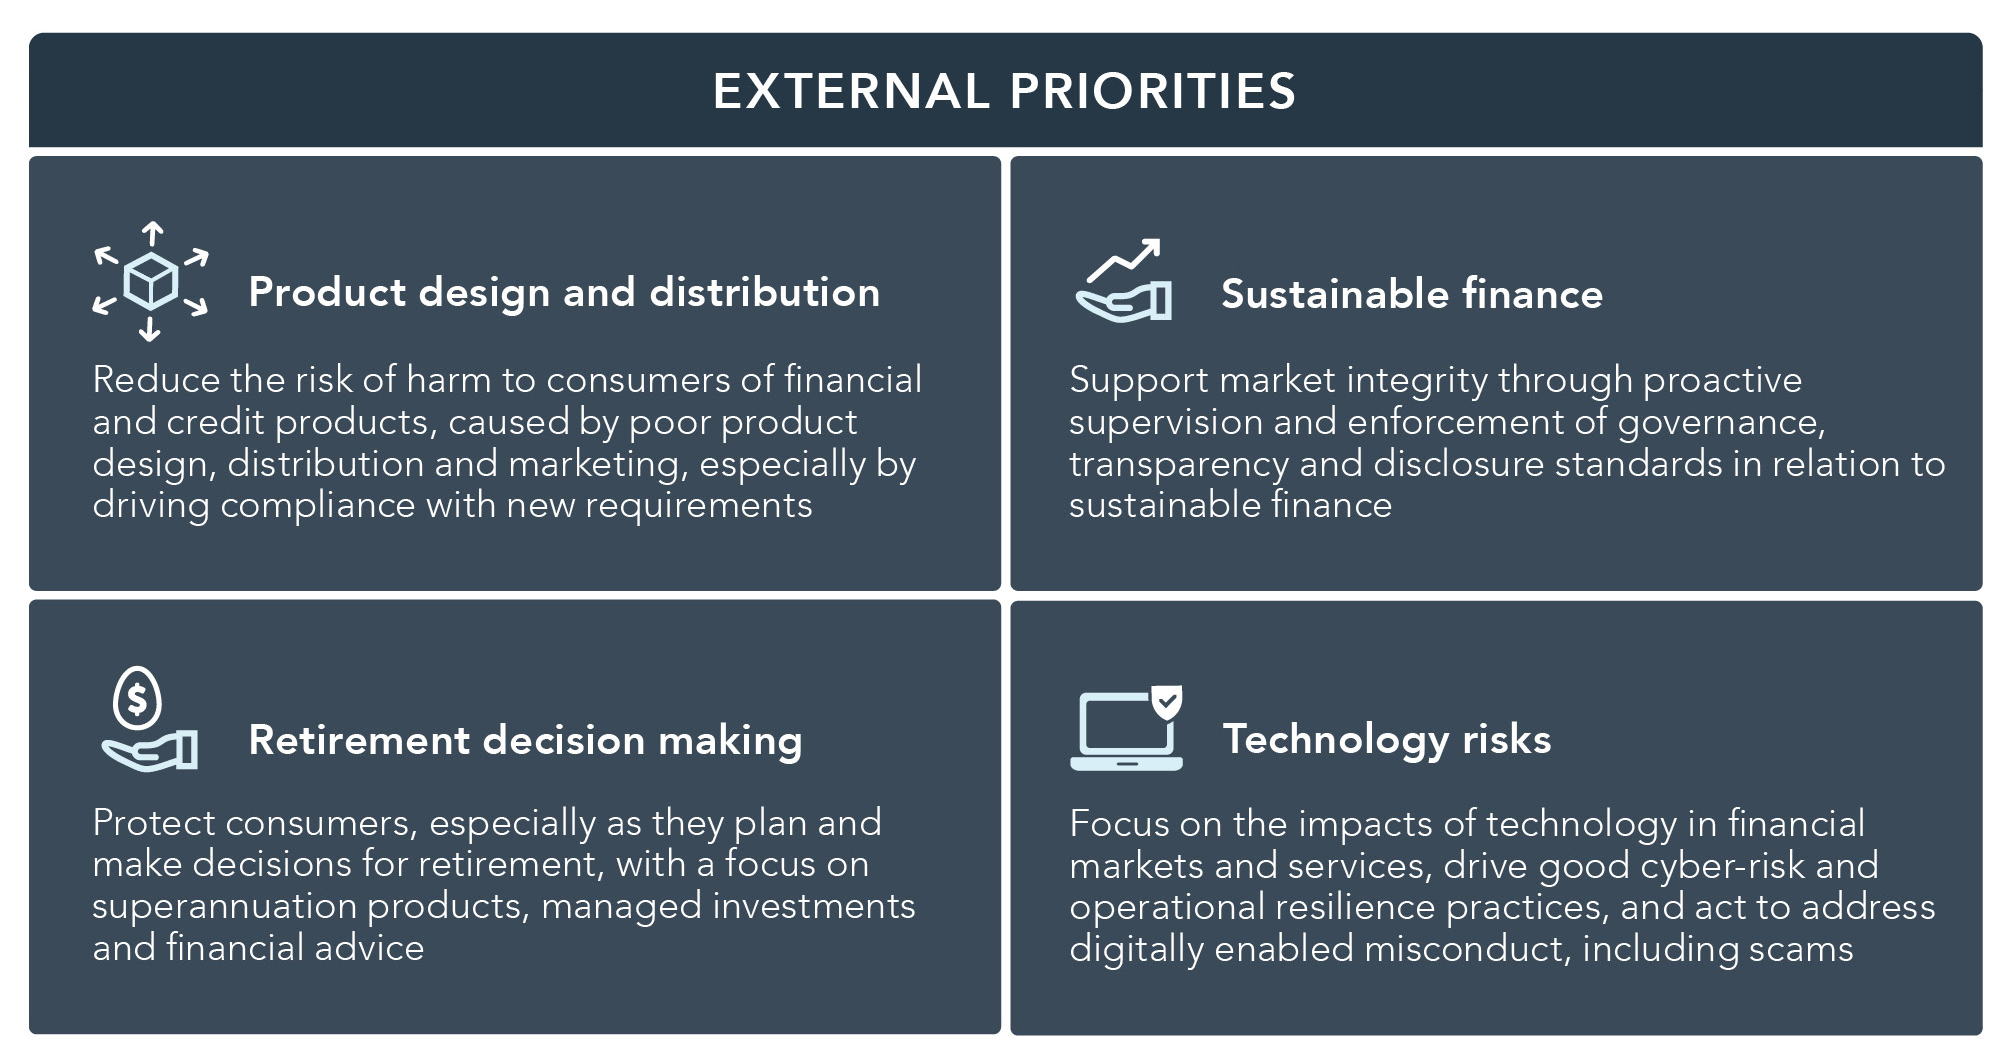 ASIC’s four external strategic priorities - see text version